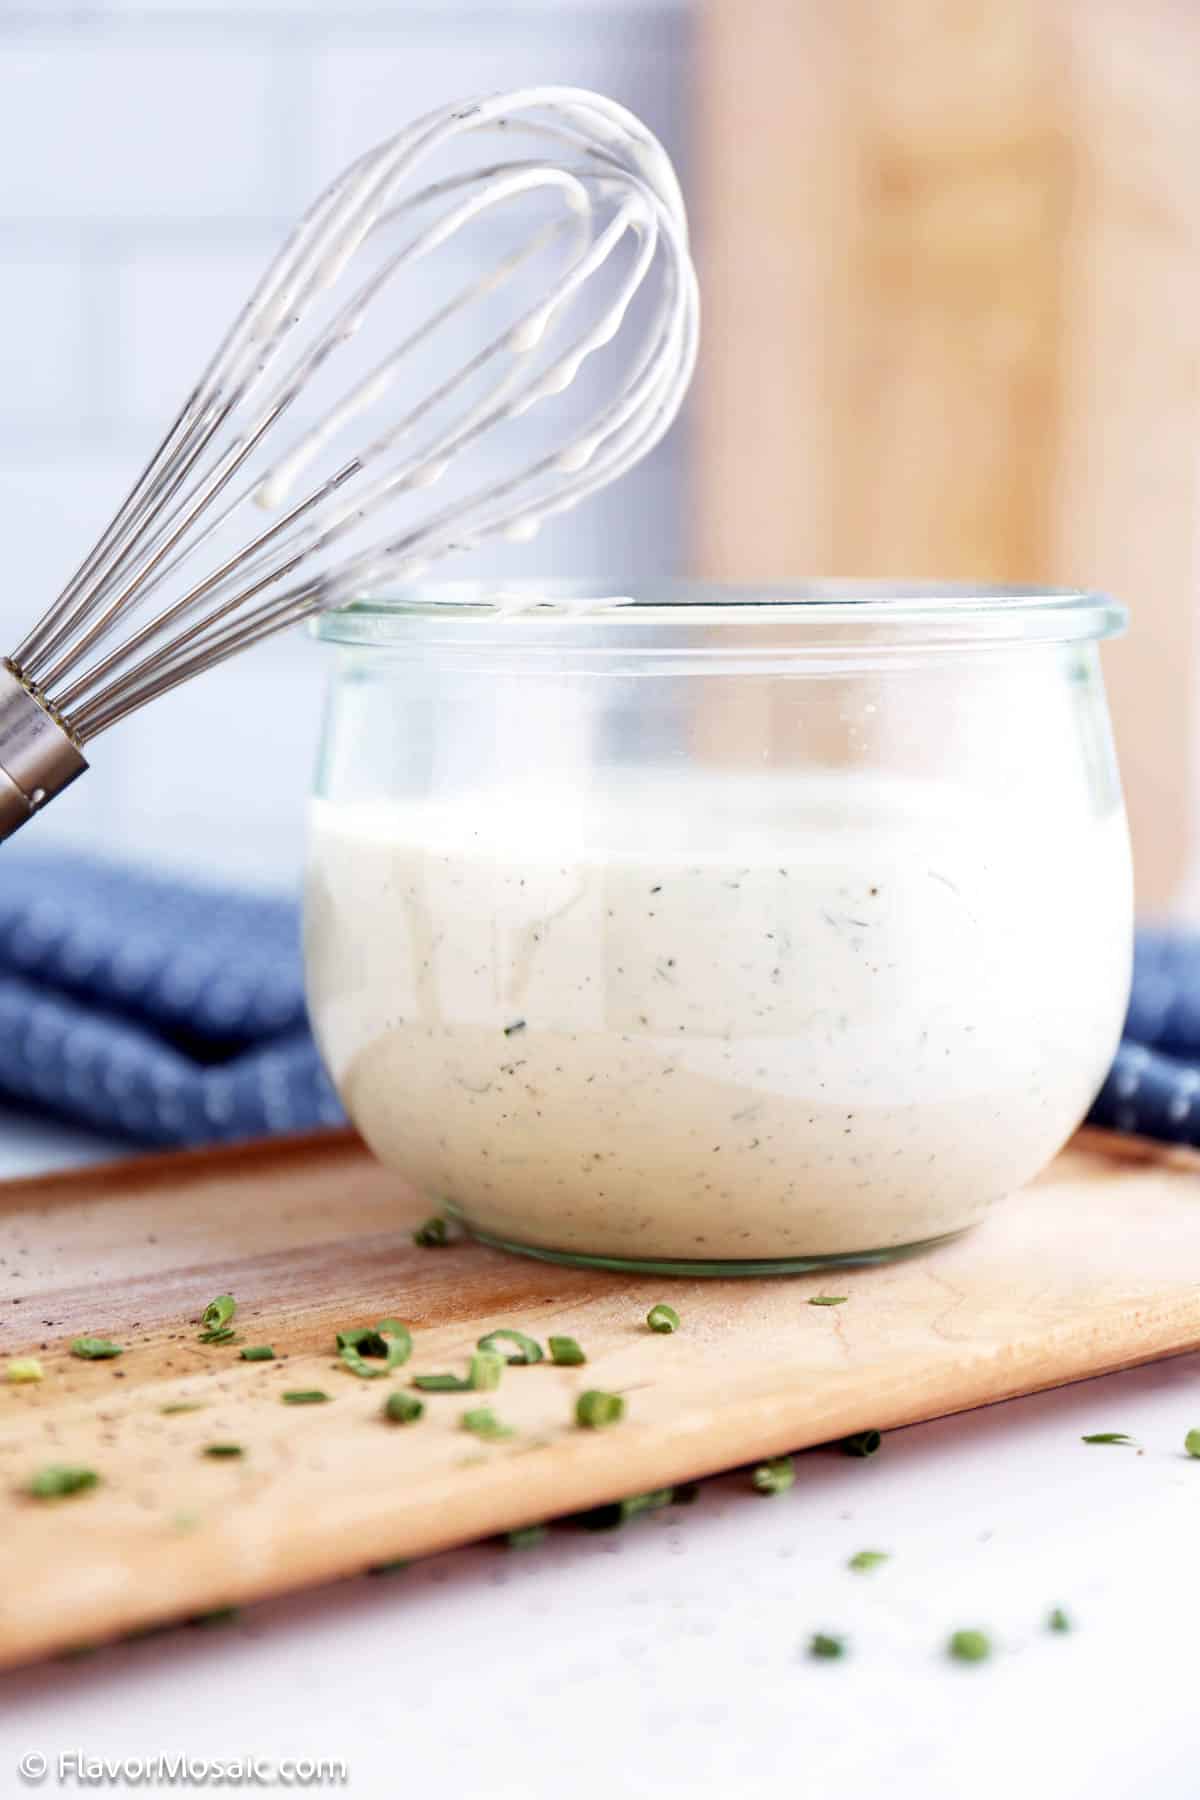 Side view small glass bowl of ranch dressing with a metal whisk leaning on it with ranch dressing on the whisk.